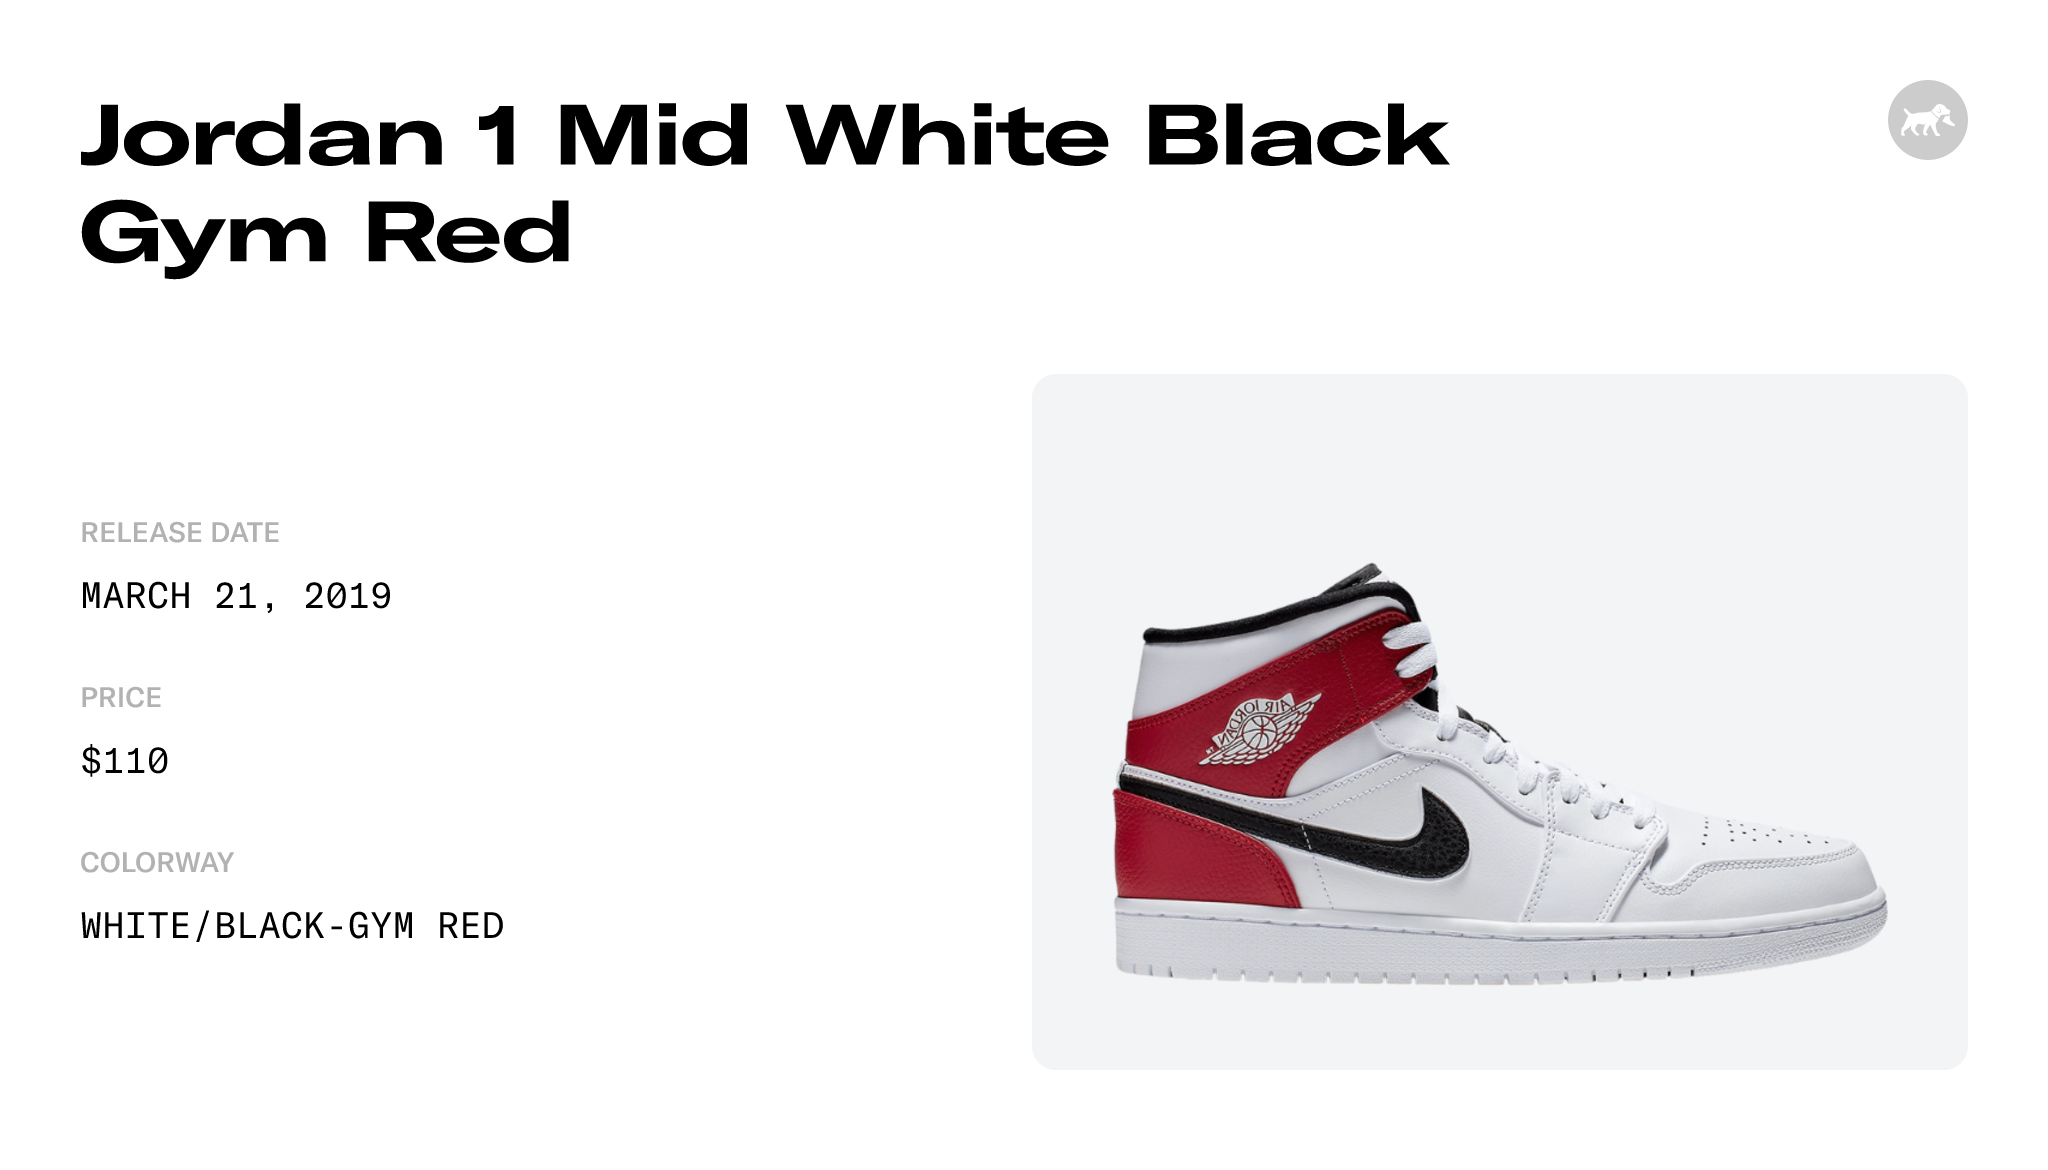 Jordan 1 Mid White Black Gym Red - 554724-116 Raffles and Release Date